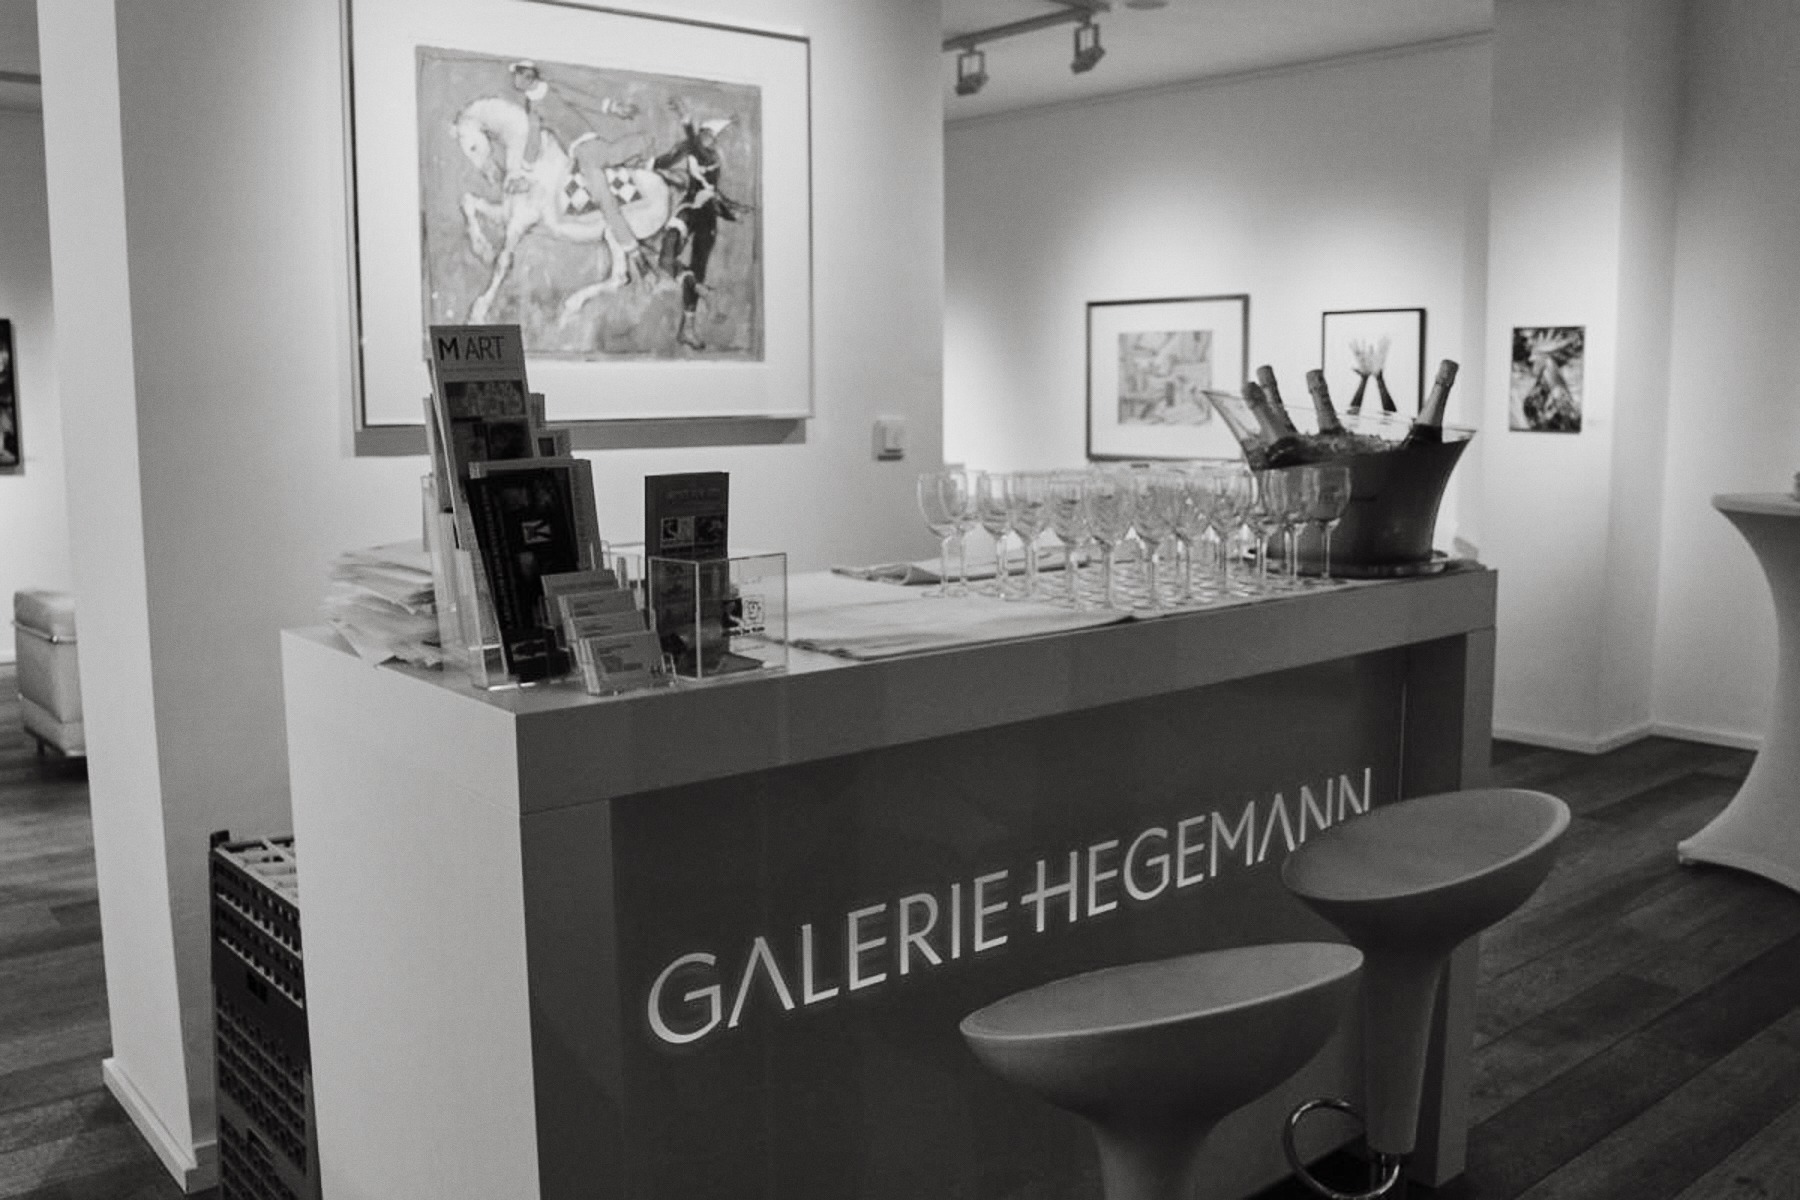 auktion galerie hegemann   artists for kids by Mike Meyer Photography